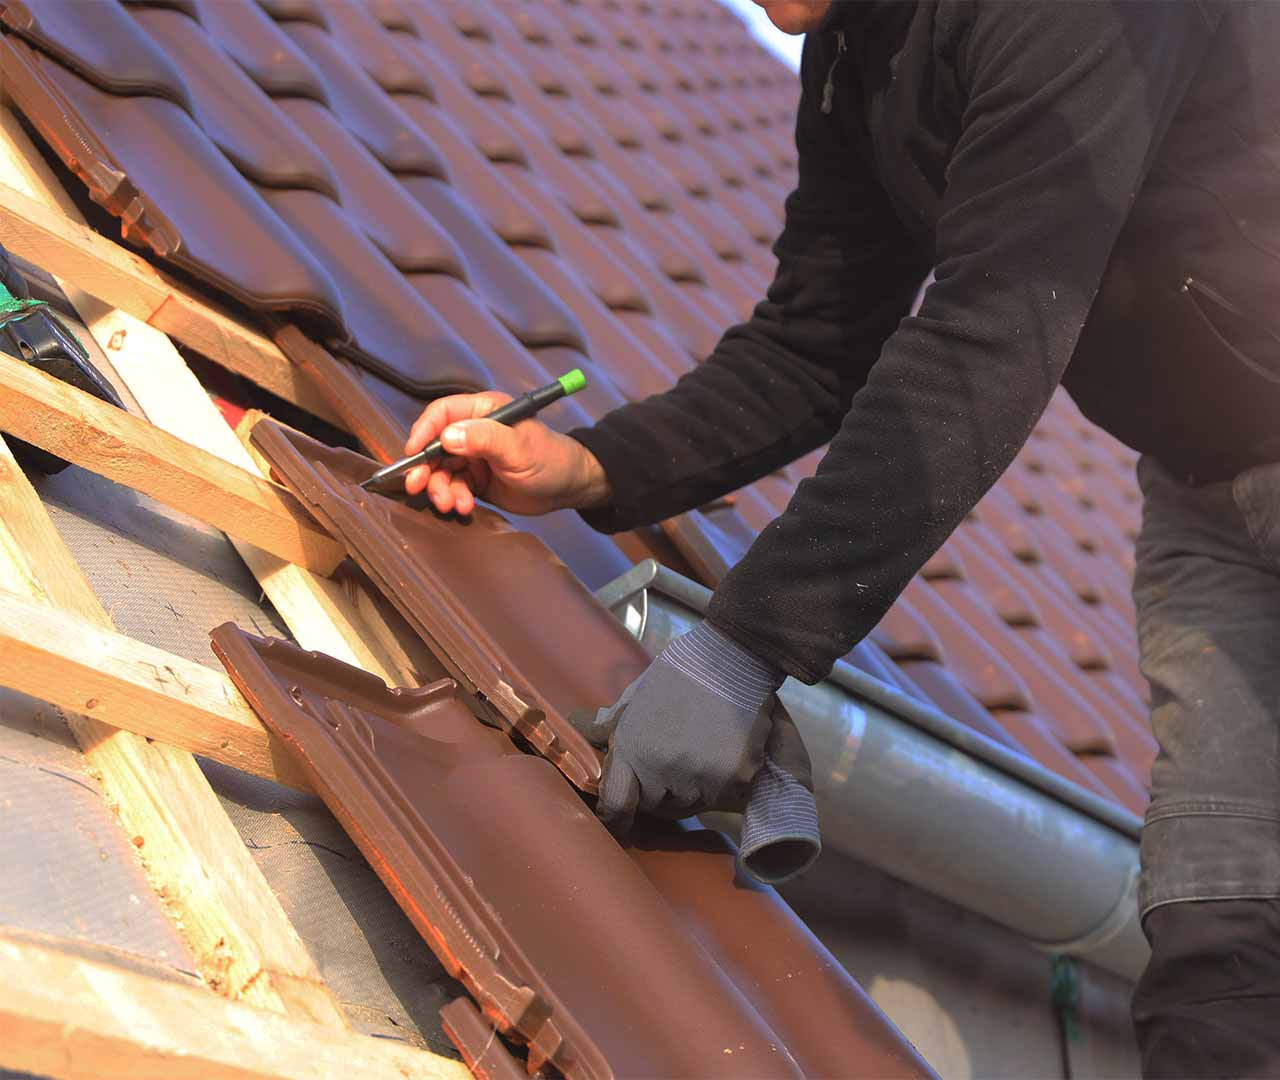 Roof plumber working